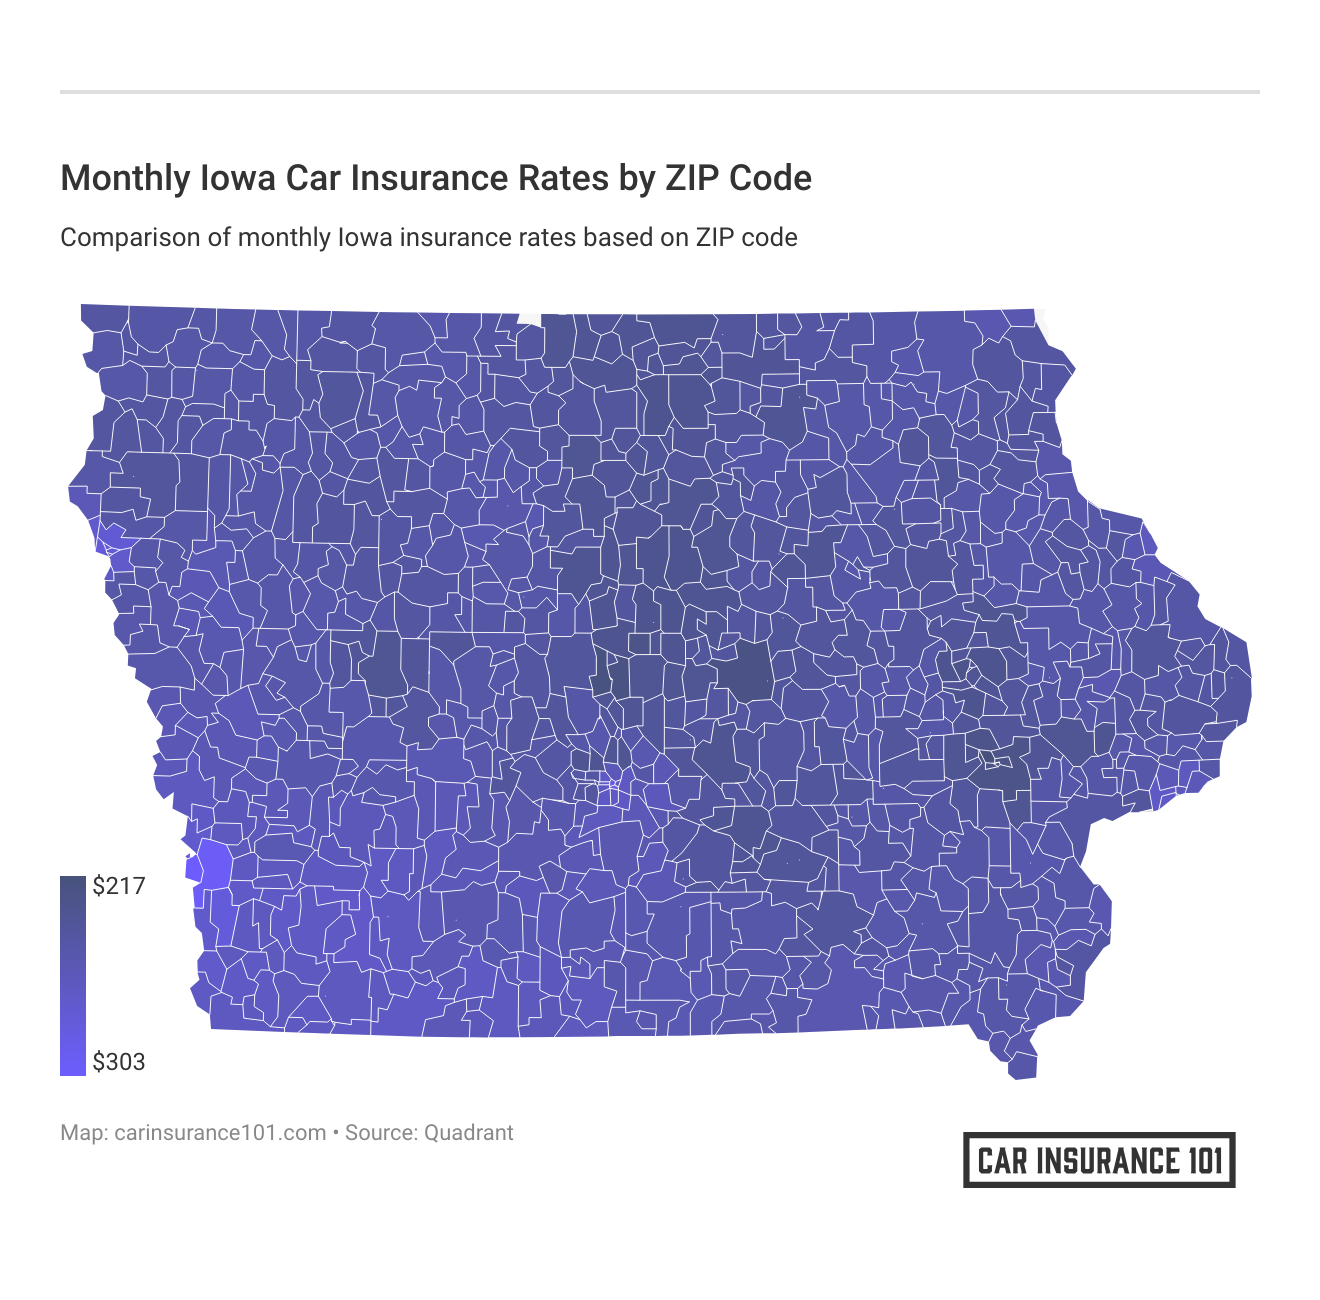 <h3>Monthly Iowa Car Insurance Rates by ZIP Code</h3>